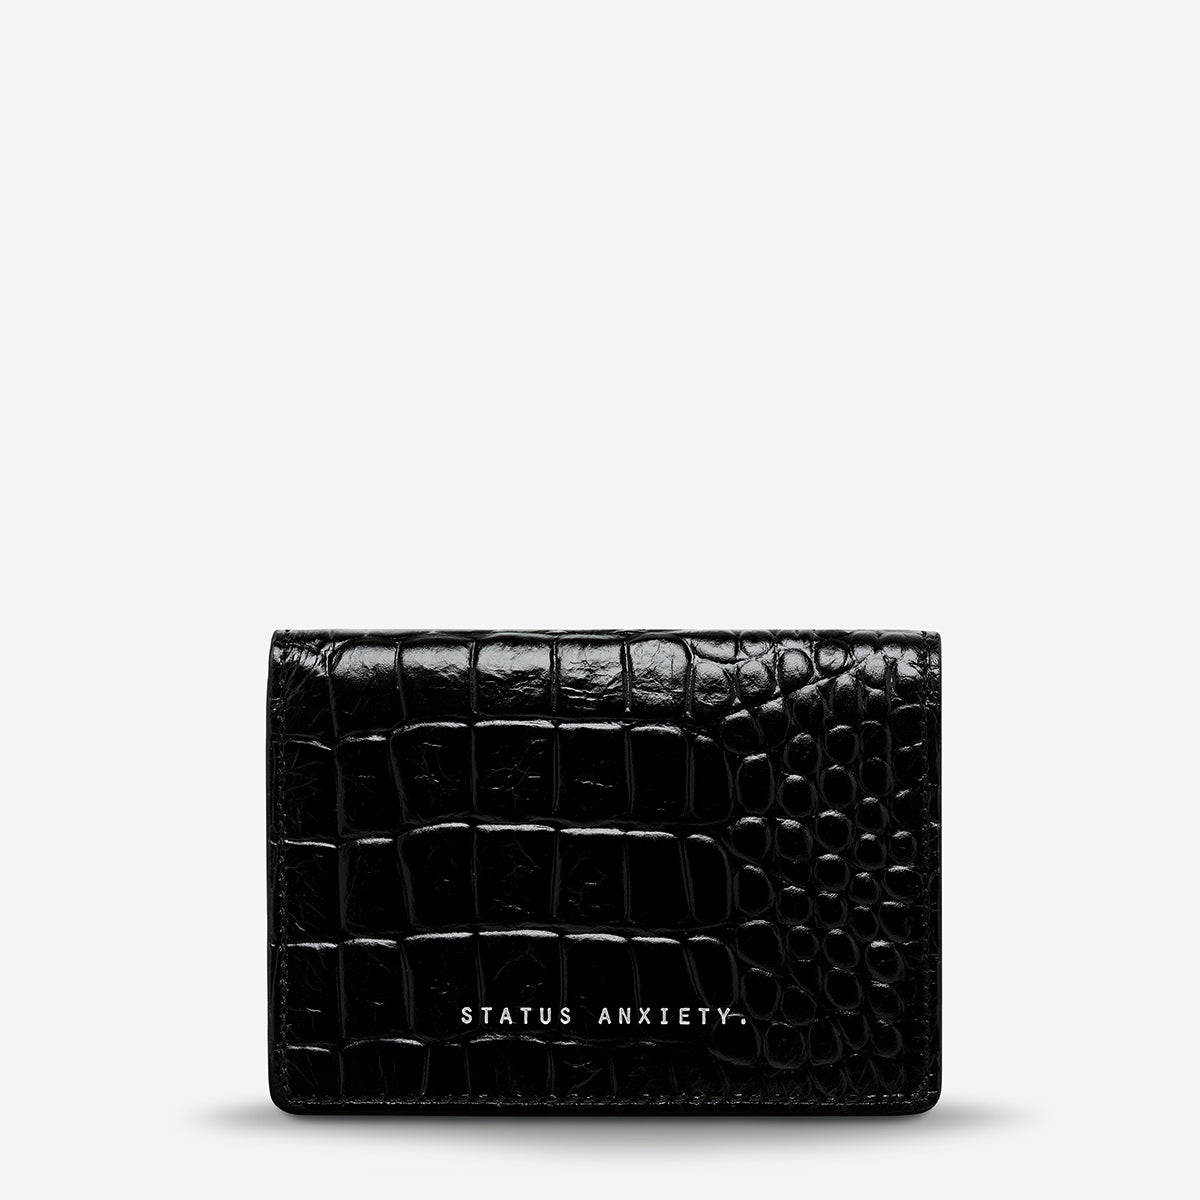 Status Anxiety Easy Does It Women's Leather Wallet Black Croc